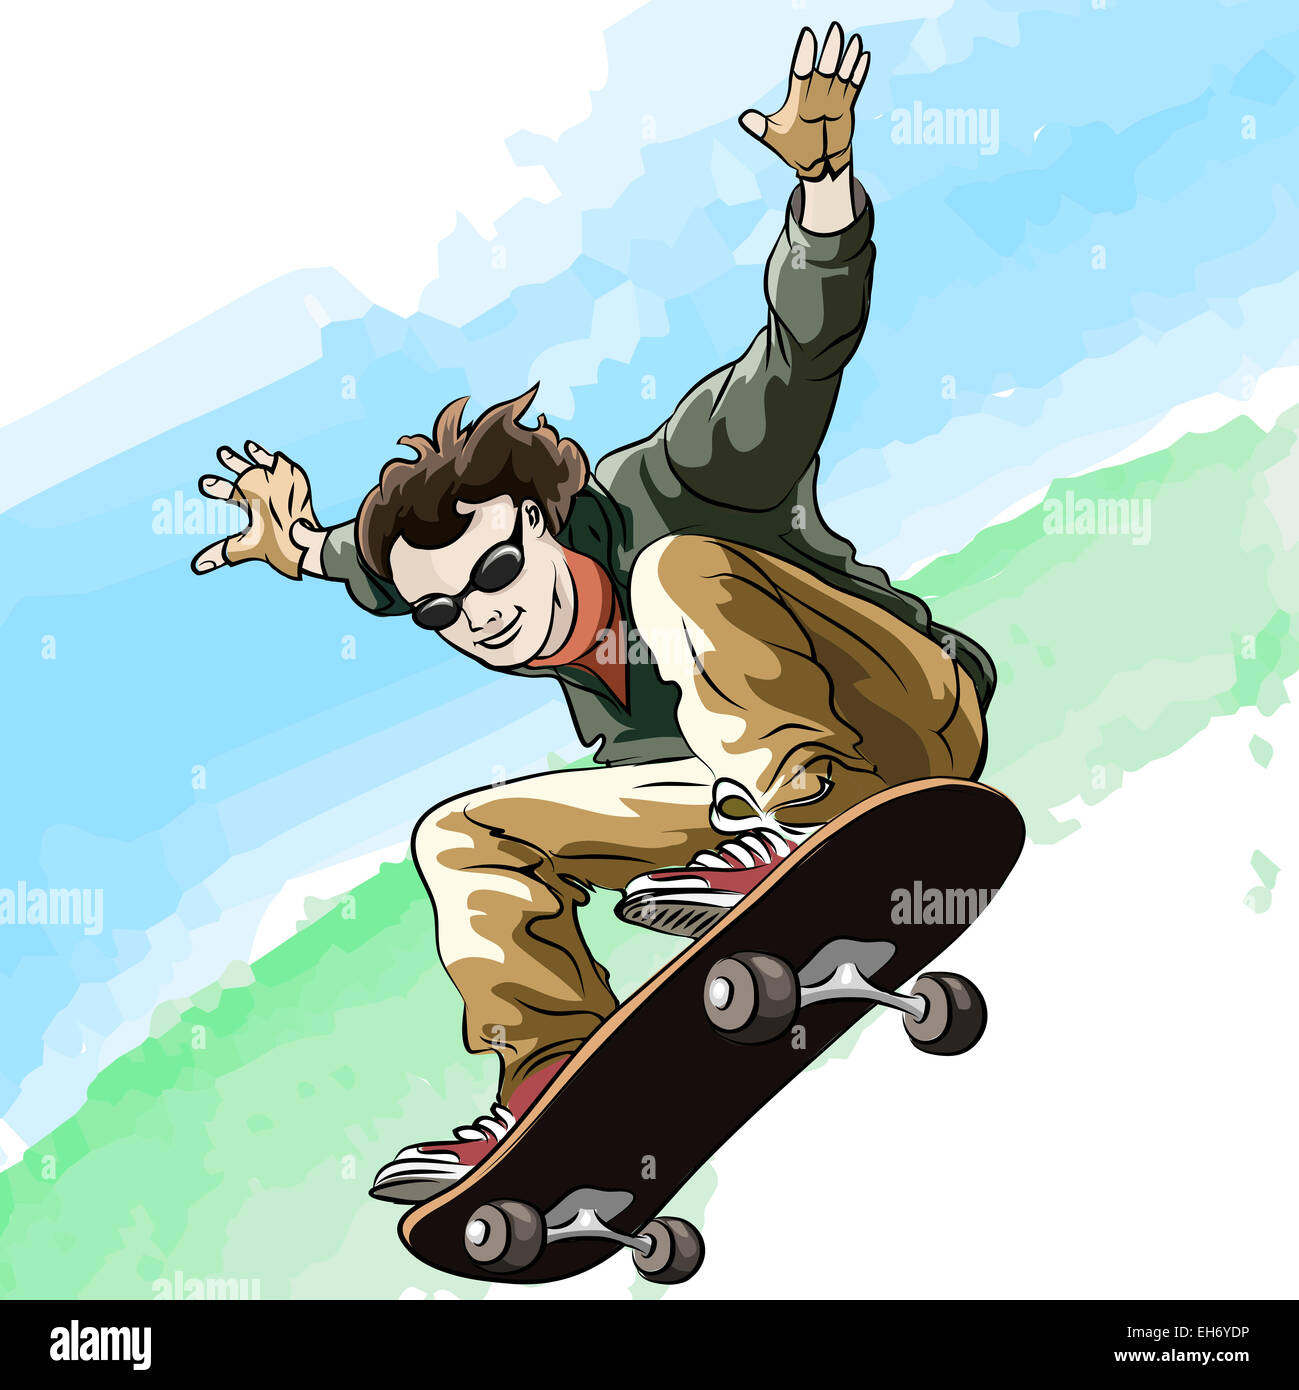 Funny illustration of jumping skateboarder against colorful summer background Stock Photo